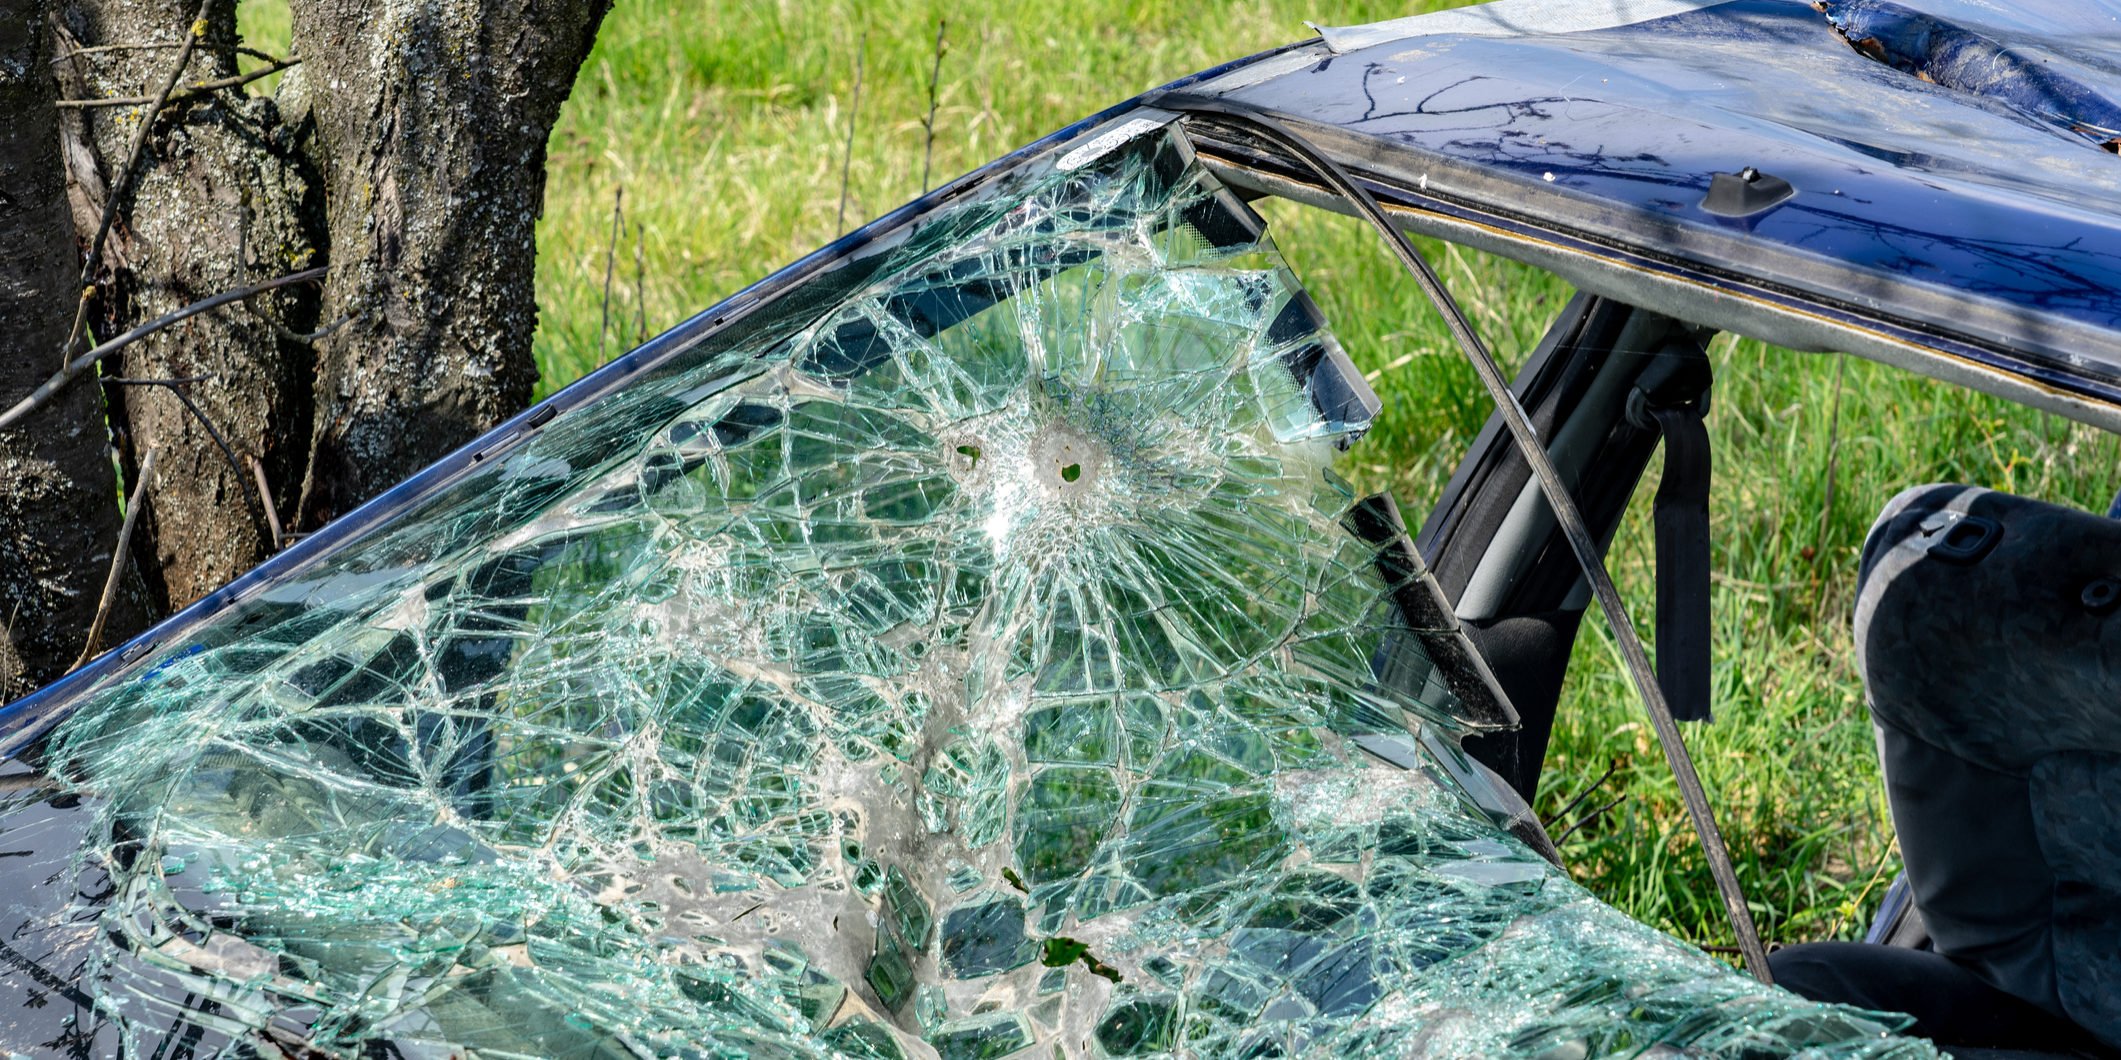 Attorney and Partner Catie Meehan of the Steinberg Law Firm recently settled a case for a client who was severely injured in a car crash in her own vehicle, but which was being driven by someone else.